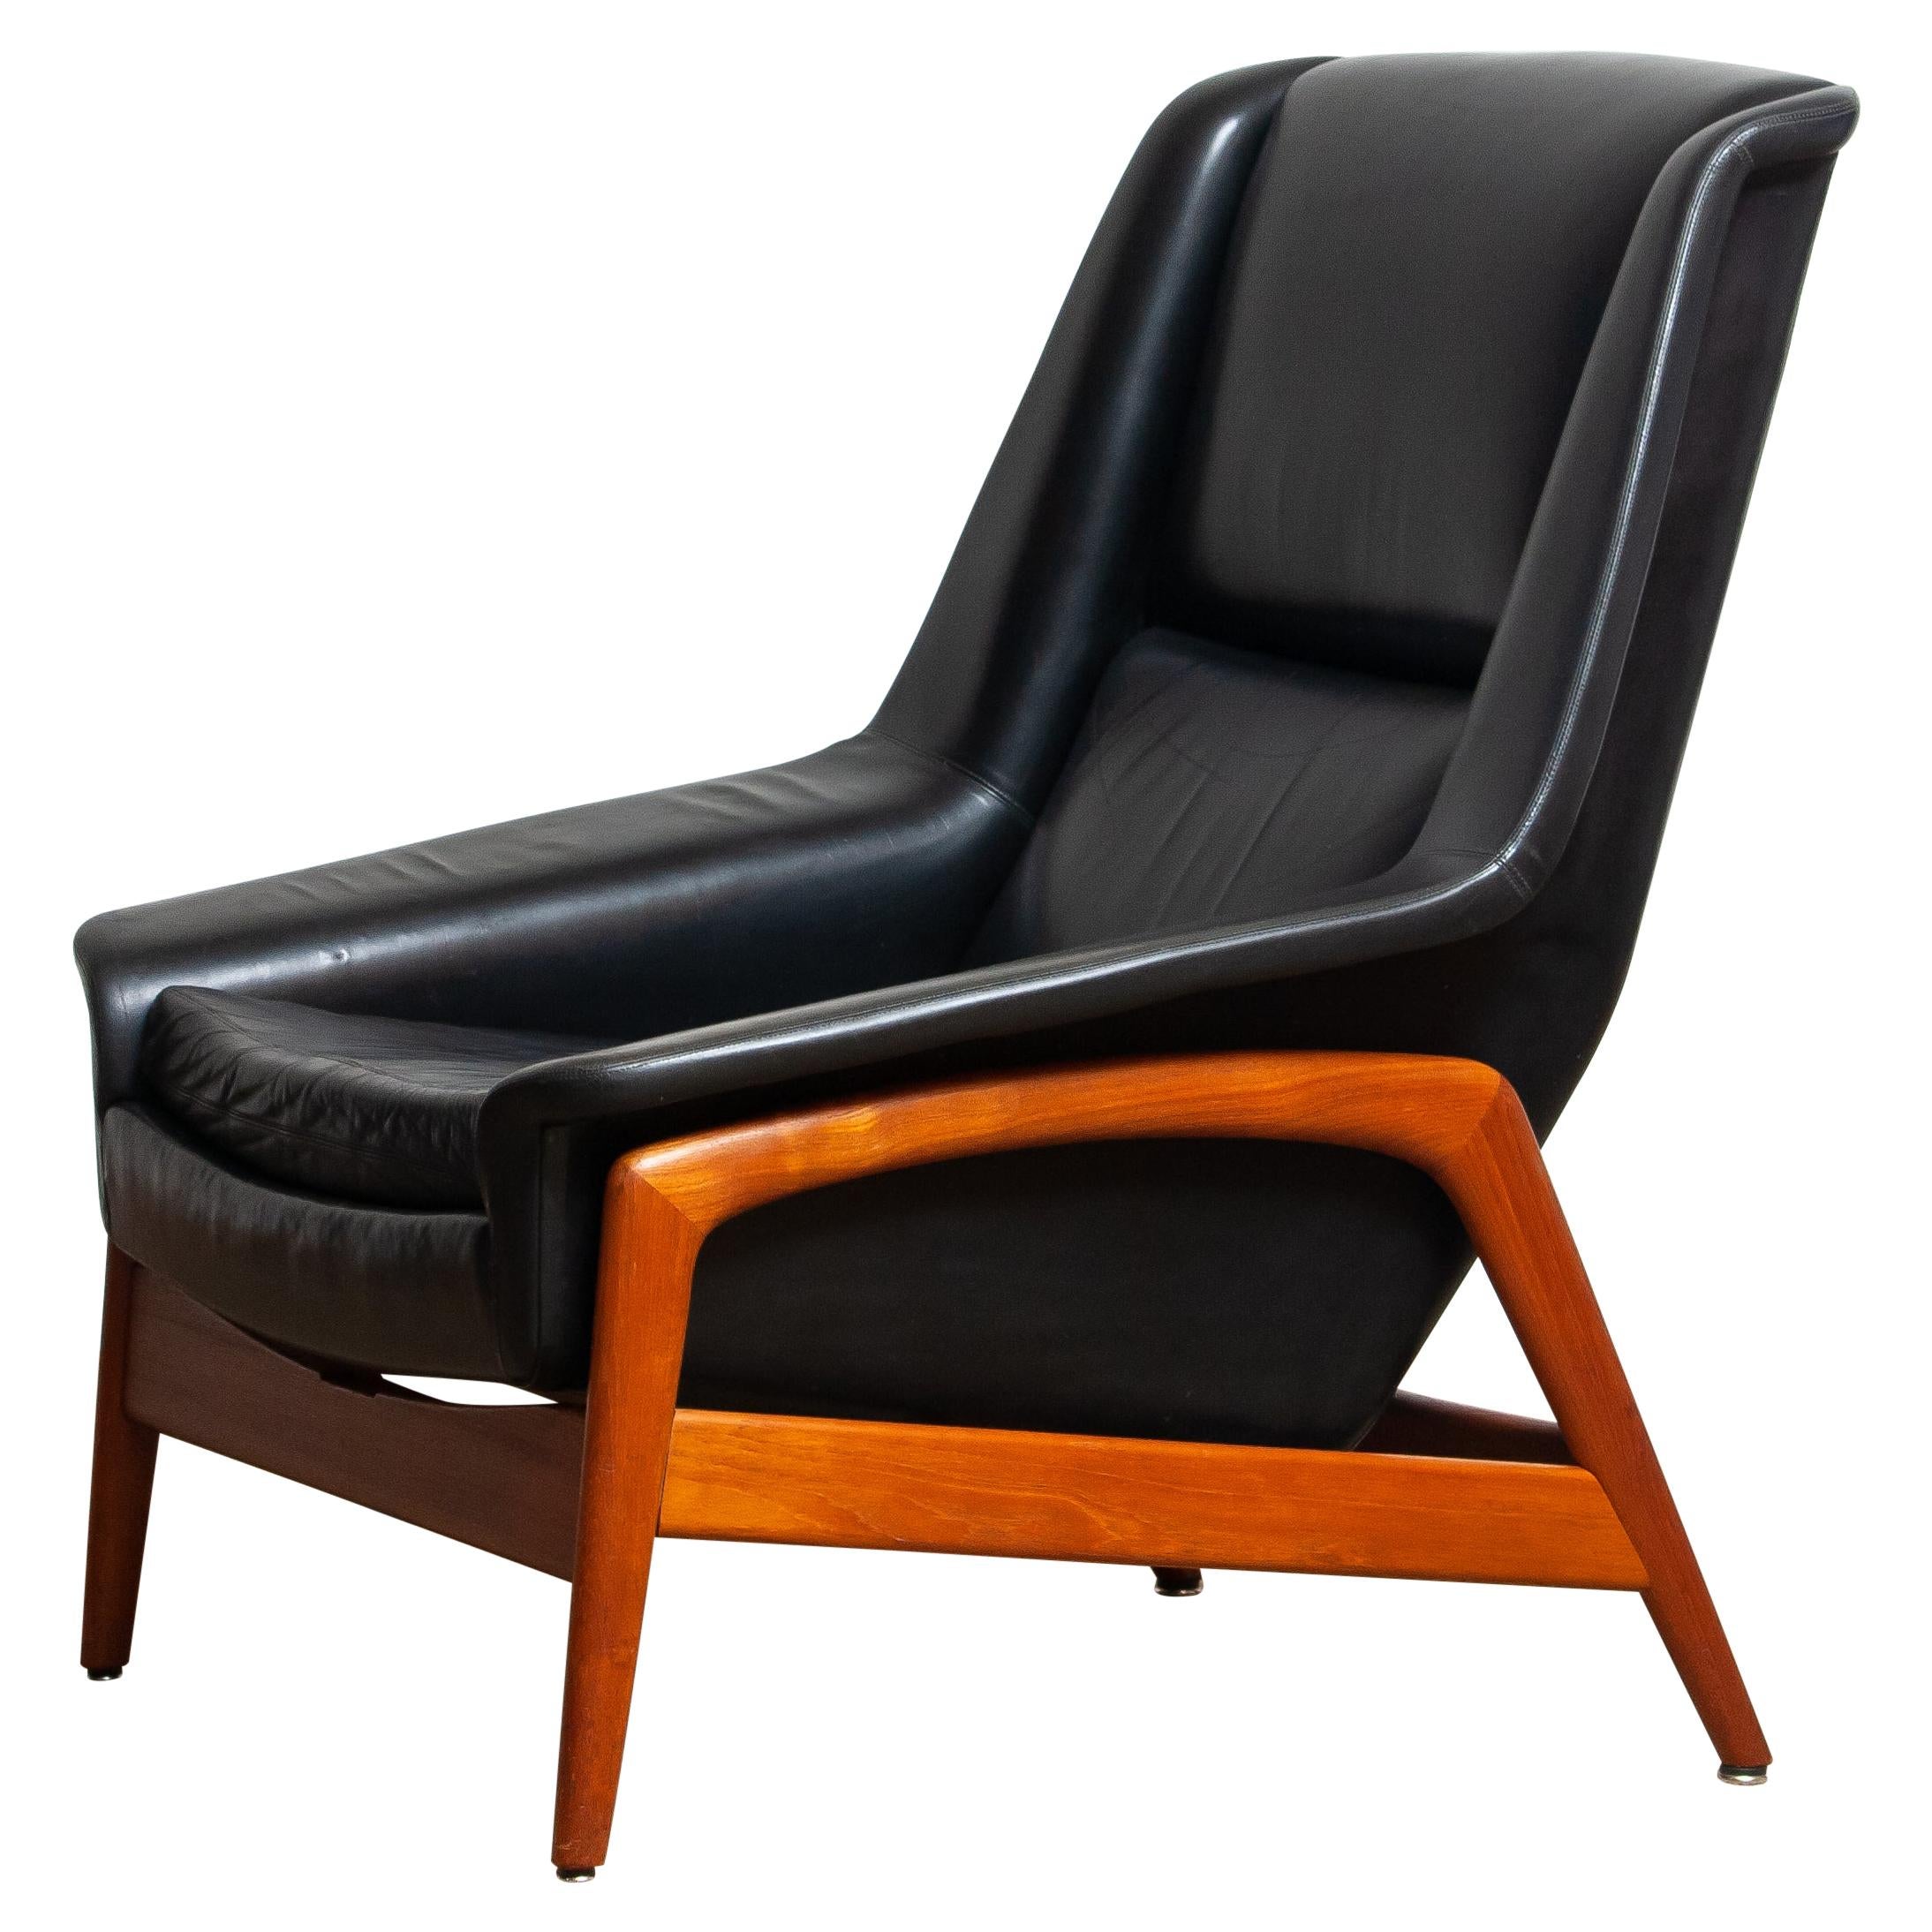 Scandinavian Modern 1960s, Lounge Chair 'Profil' by Folke Ohlsson for DUX in Leather and Teak 1